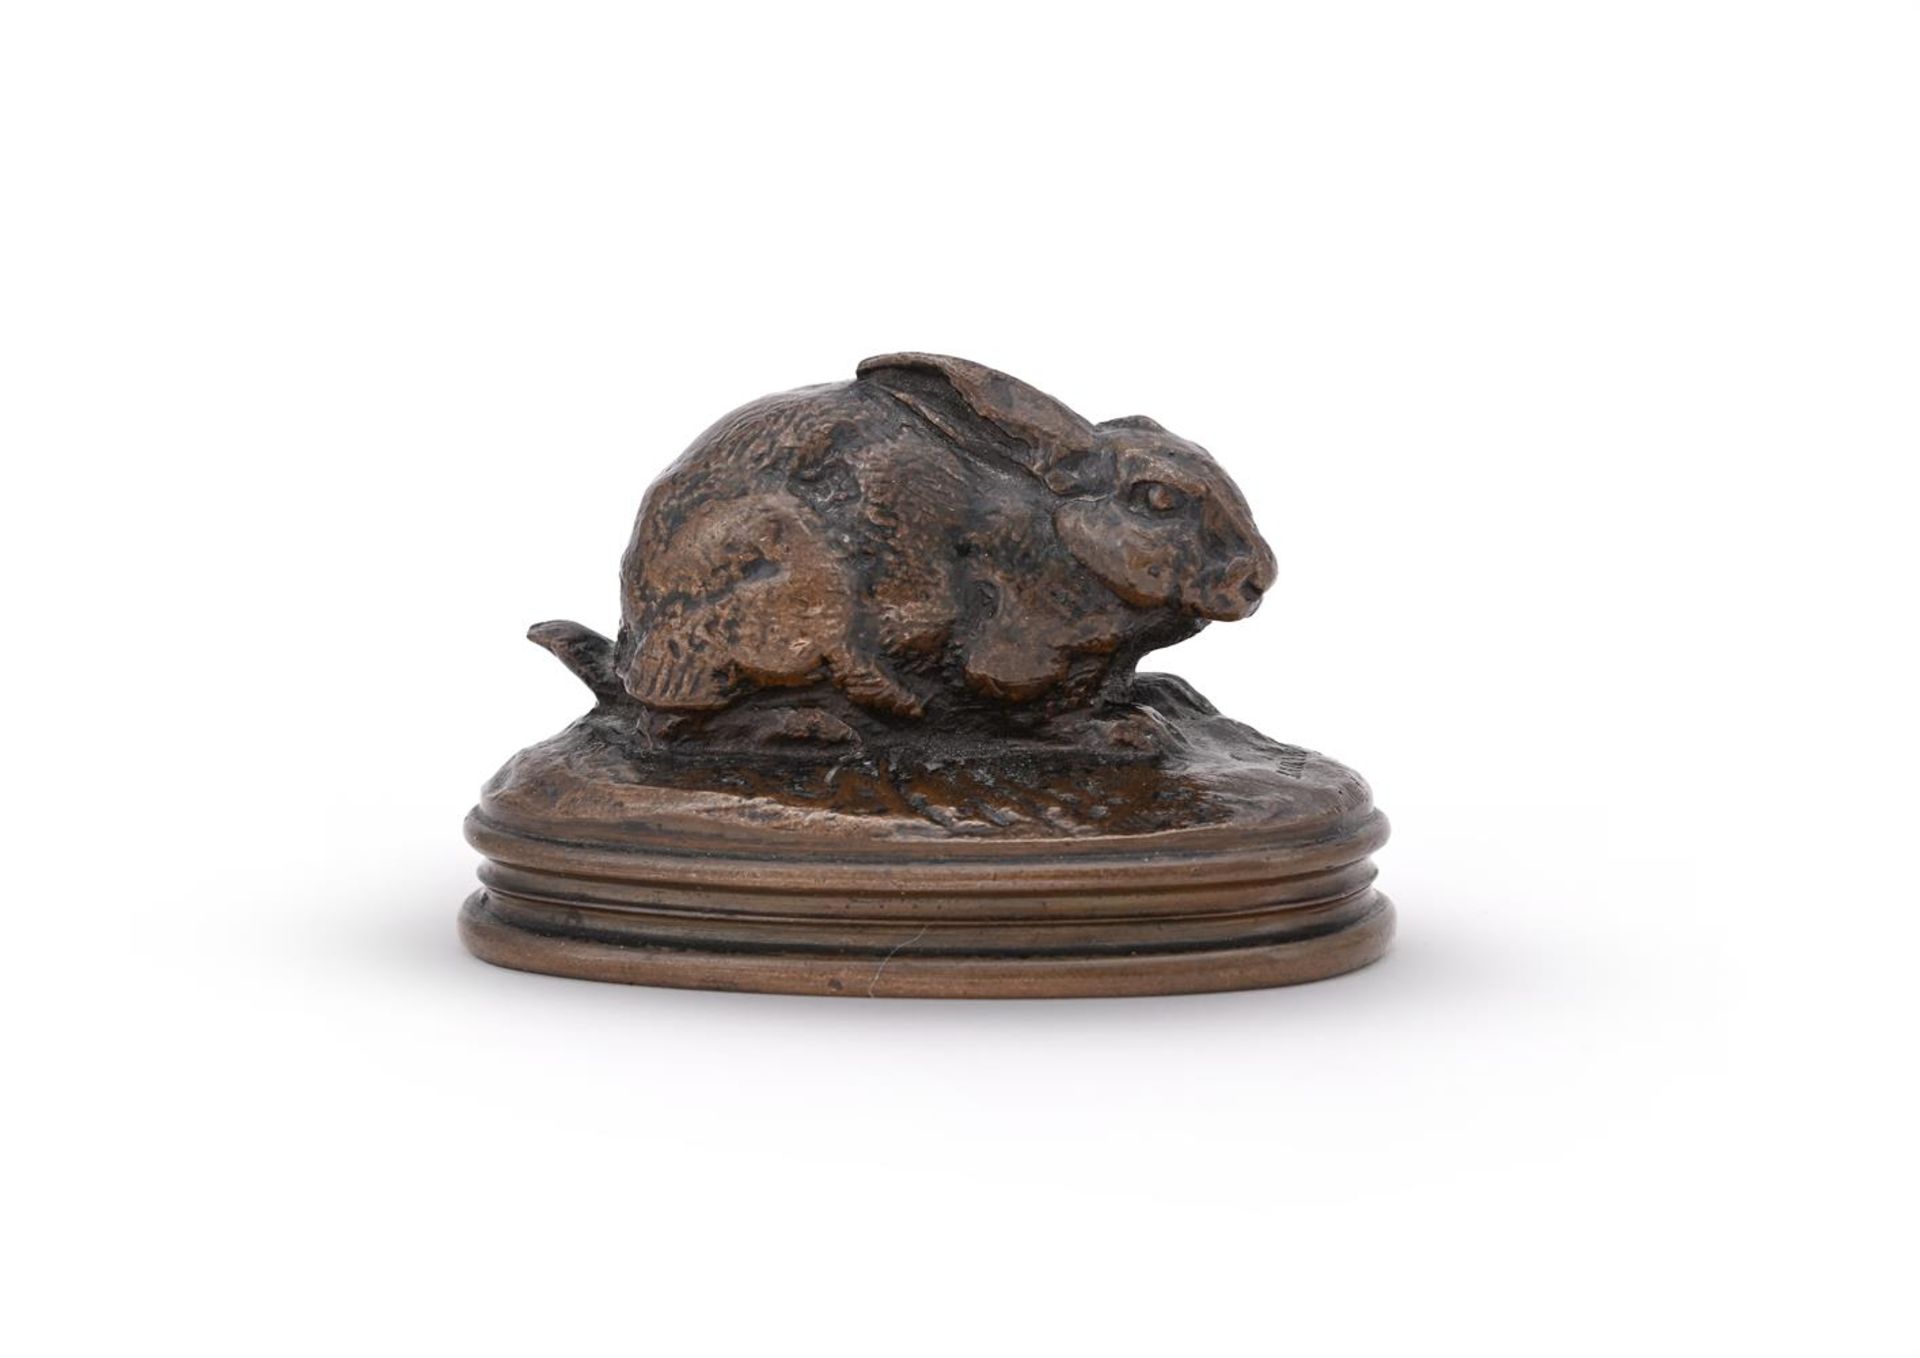 ANTOINE-LOUIS BARYE (FRENCH, 1795-1875), A BRONZE MODEL OF A CROUCHING RABBIT - Image 5 of 6